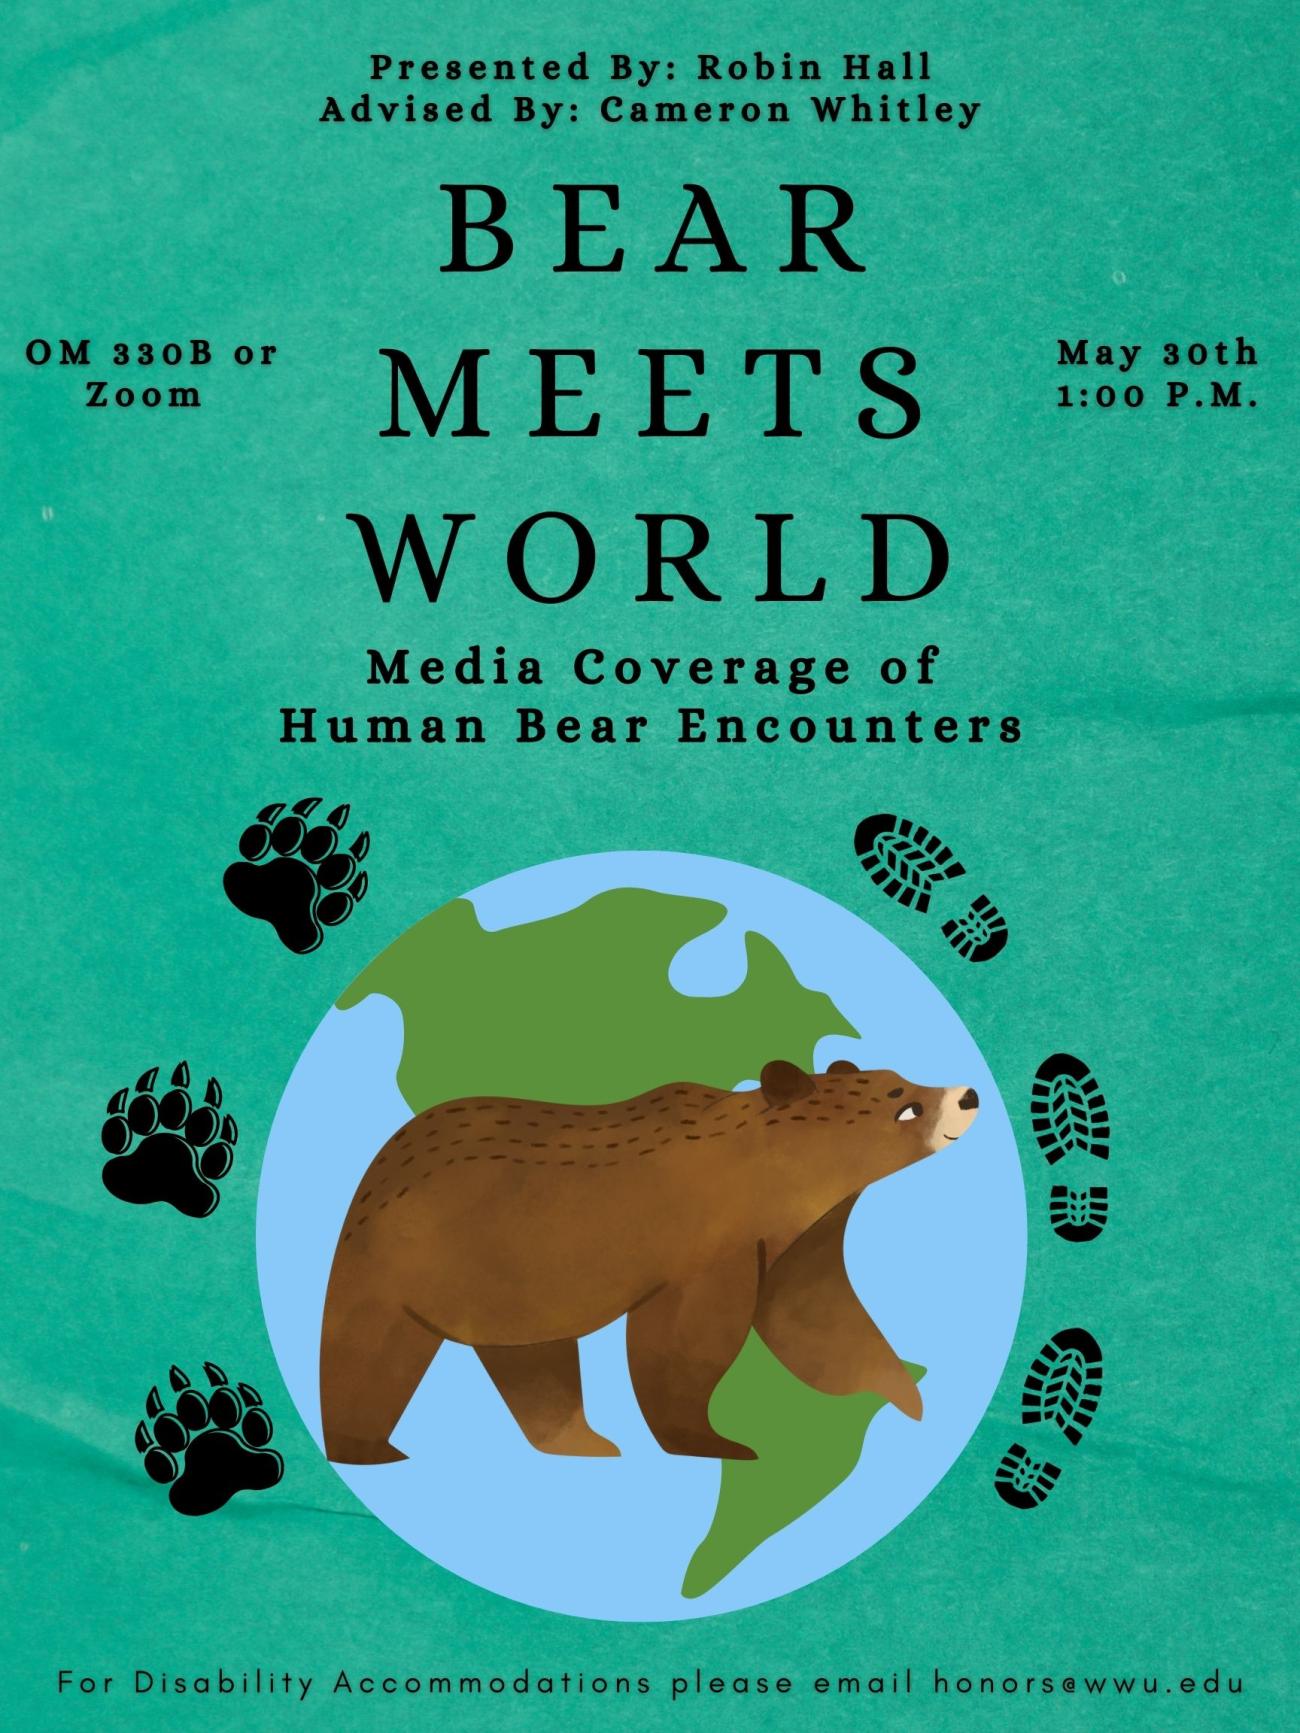 Blue/green paper background with cartoon bear graphic layered on top of planet earth graphic. Three black shoe prints and three black bear prints surround the earth graphic. Text at top reads “Presented By: Robin Hall Advised By: Cameron Whitley”, then “Bear Meets World” in the middle, then “Media Coverage of Bear Encounters” at the bottom. Bottom of page reads “For Disability Accommodations please email honors@wwu.edu”. Sides of page read from right to left “OM 331 or Zoom” then “May 30th 1:00 P.M.”